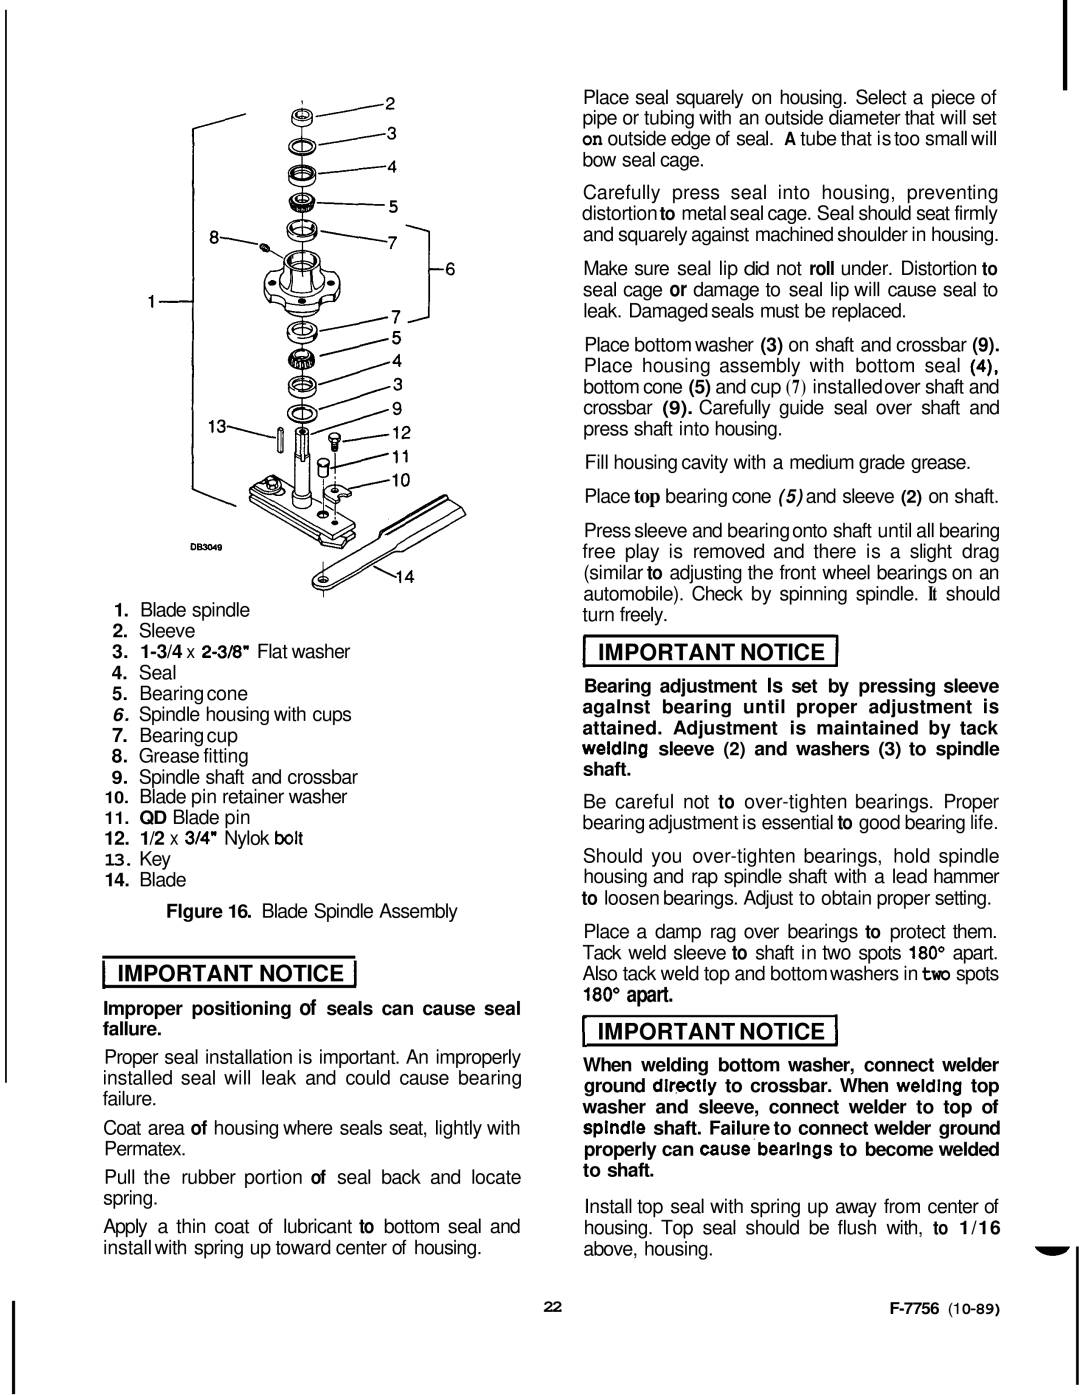 Honda Power Equipment RM752A manual apart IMPORTANT NOTICE, I Important Notice, Blade spindle 2. Sleeve 